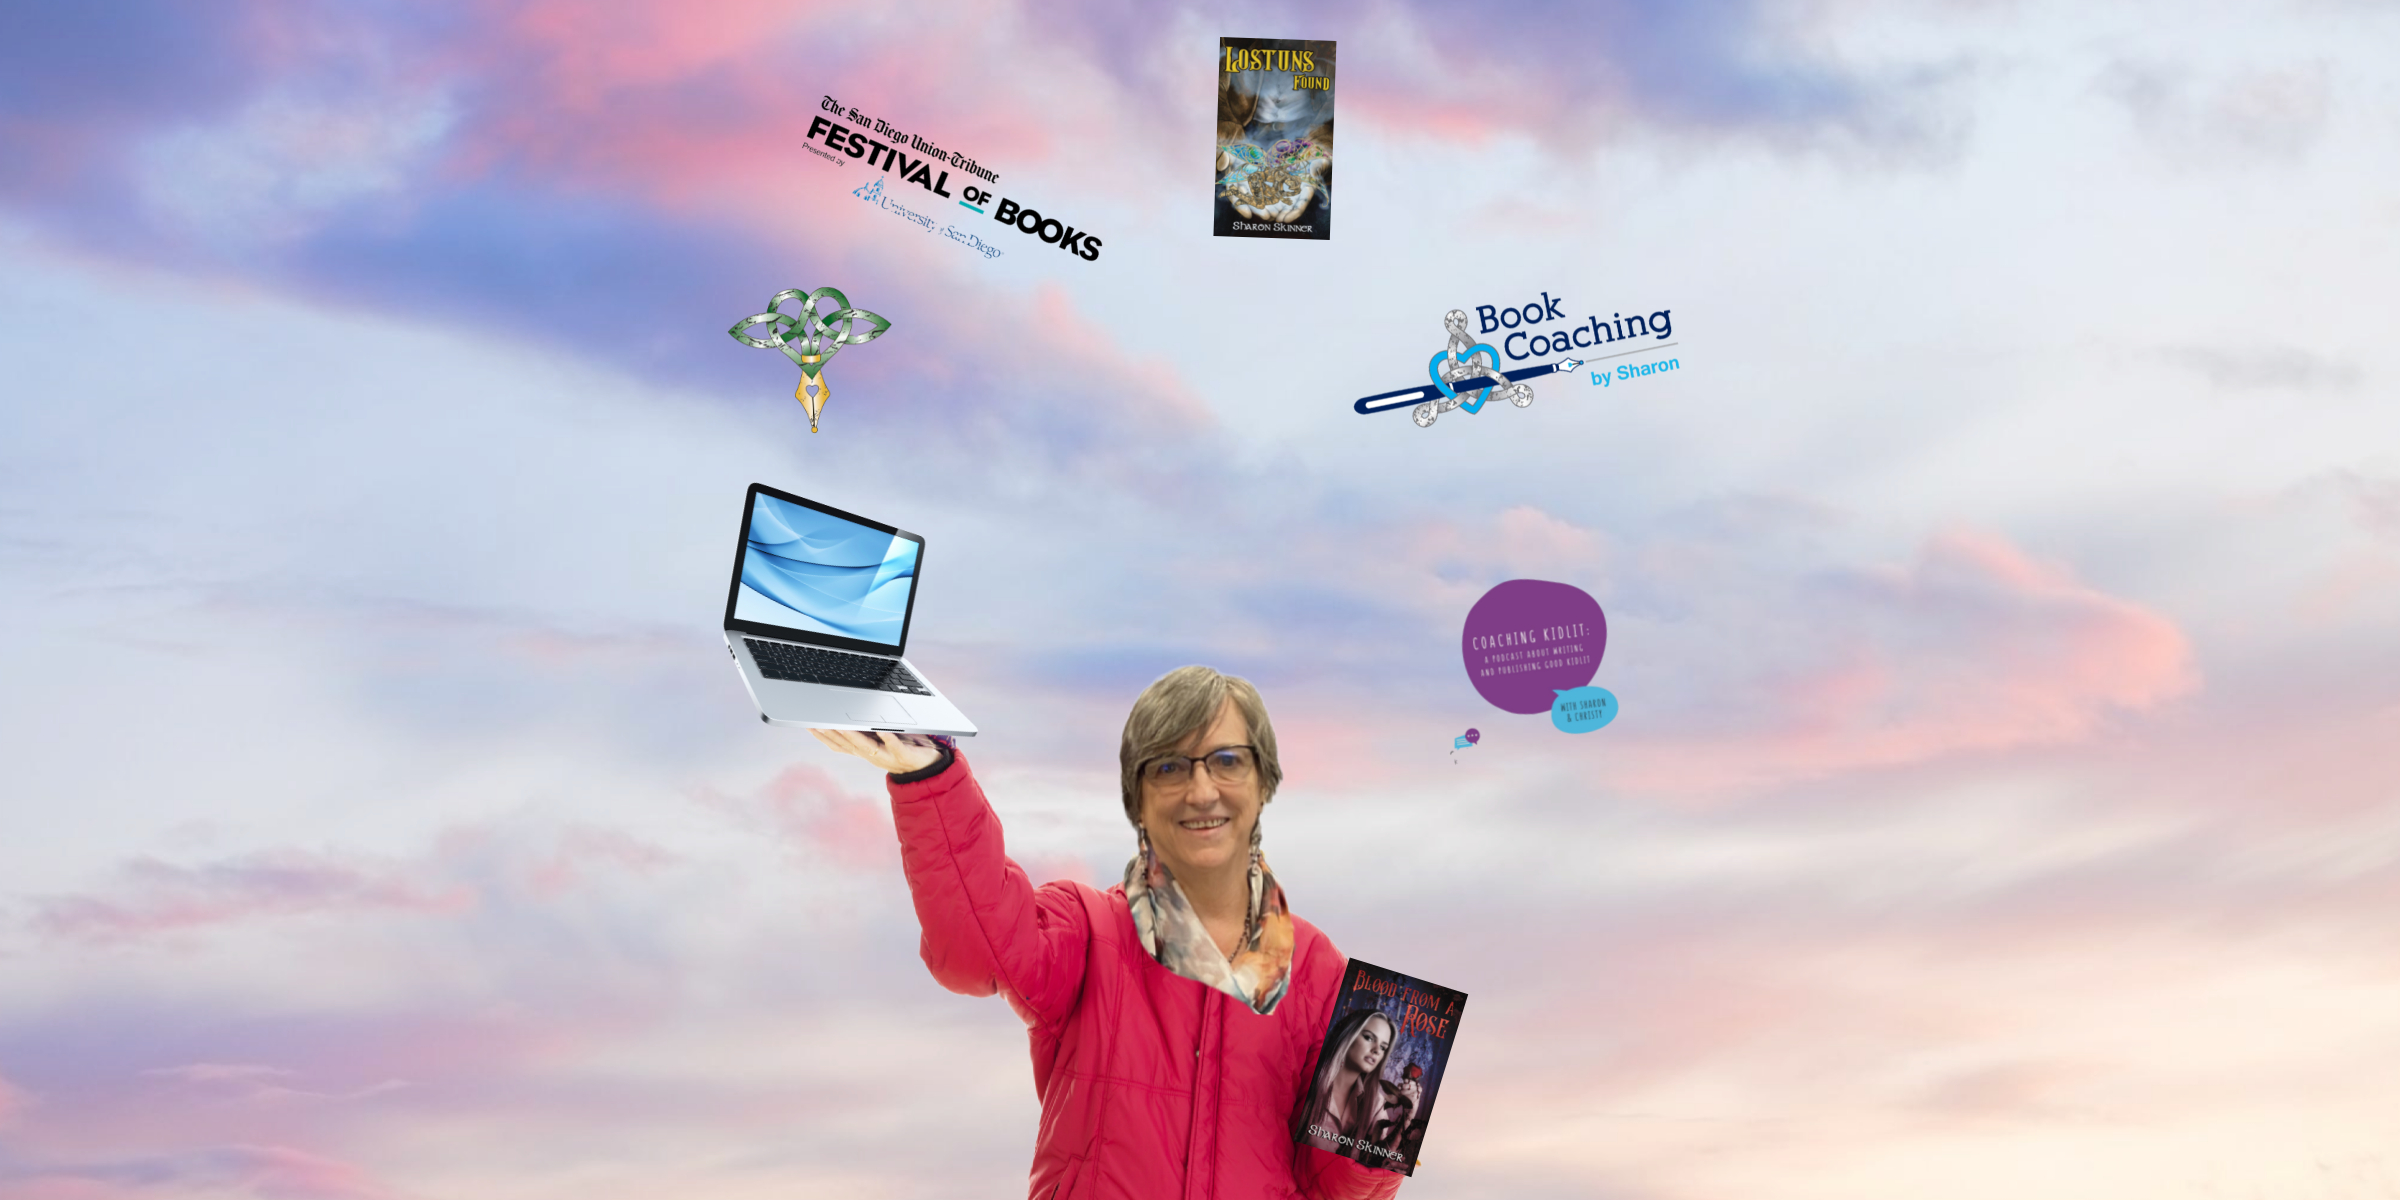 Sharon juggling images of her books (Lostuns Found & Blood From a Rose, a laptop, her business and author logos, a book festival header and a podcast logo for coaching kidlit against a cloudy evening sky to represent being an author and book coach.